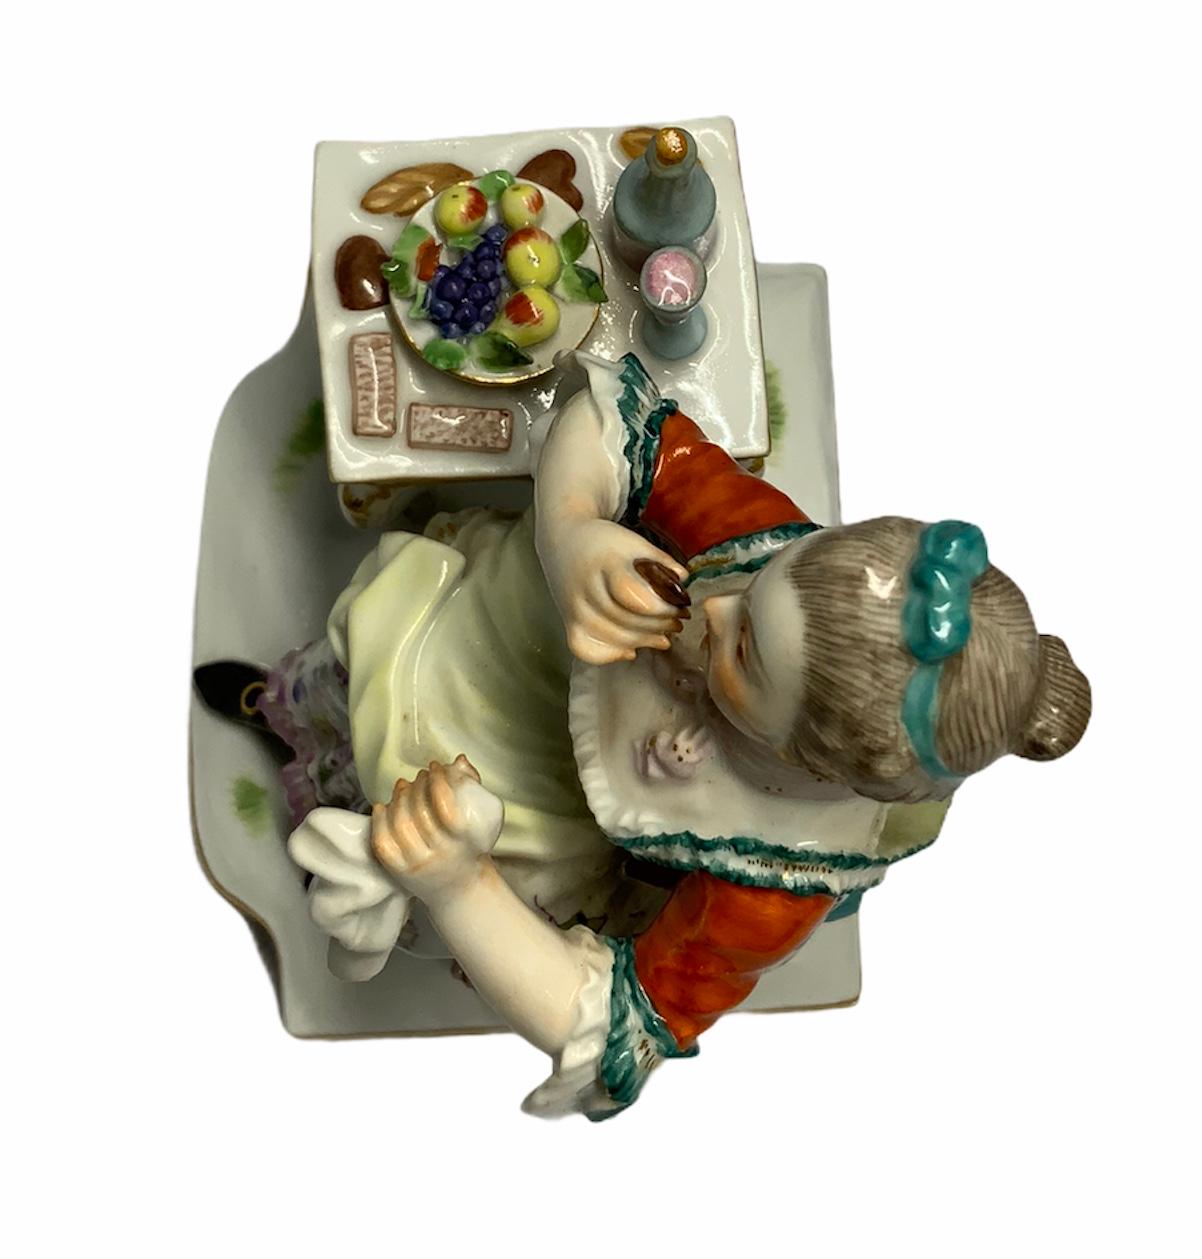 Hand-Painted Meissen Porcelain Lady Figurine Enjoying a Meal